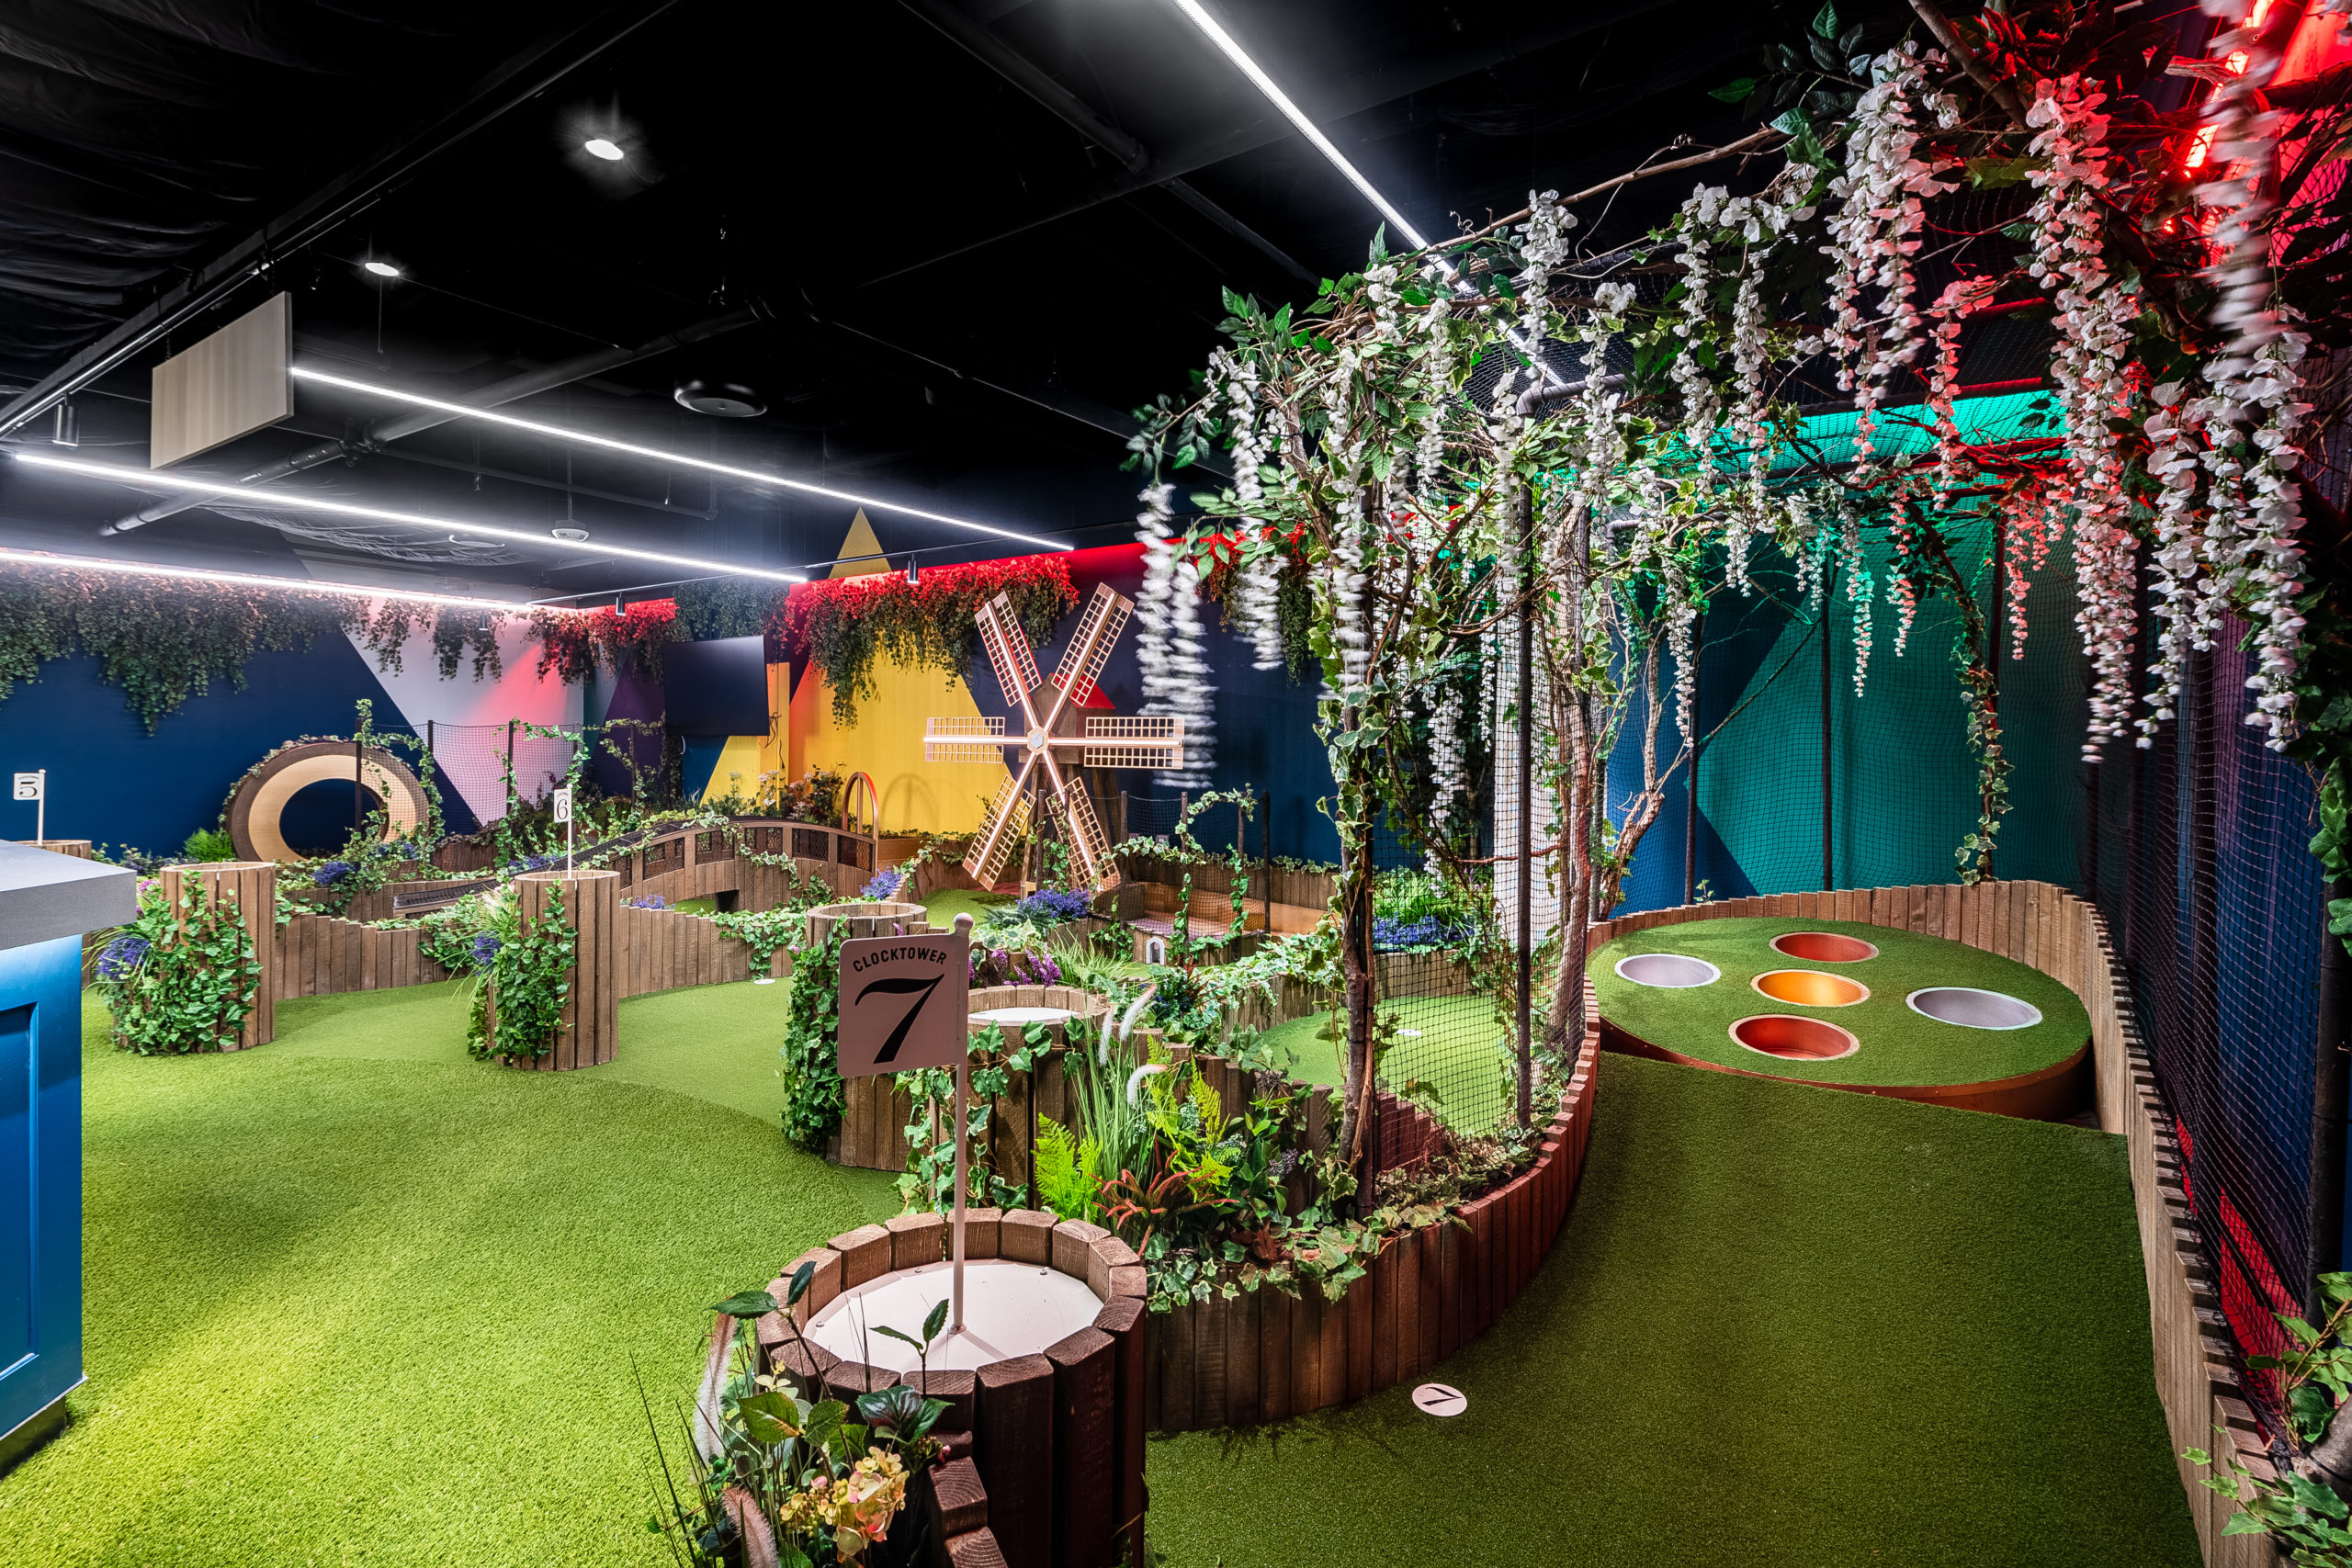 Swingers Brings Crazy Golf to pic